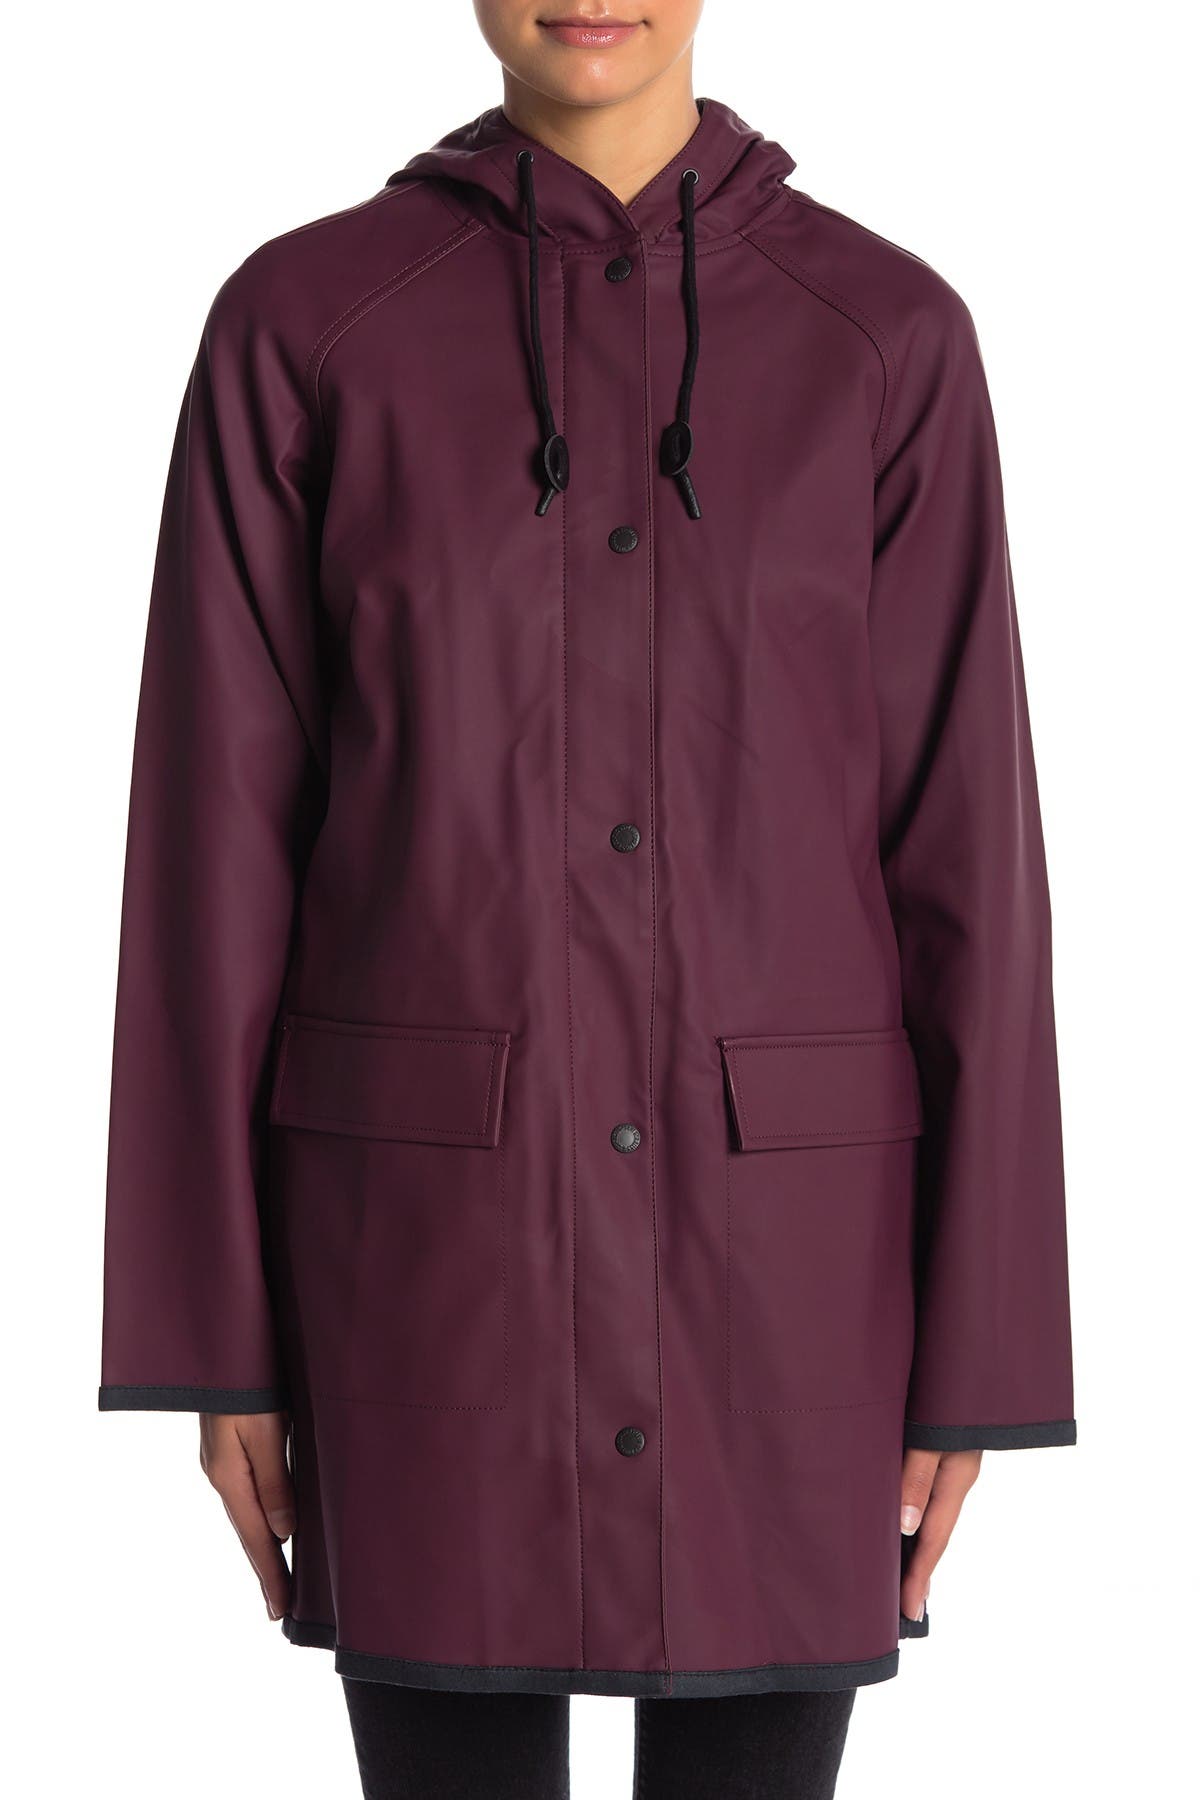 Levi's Hooded Front Zip Raincoat Store, SAVE 37% 